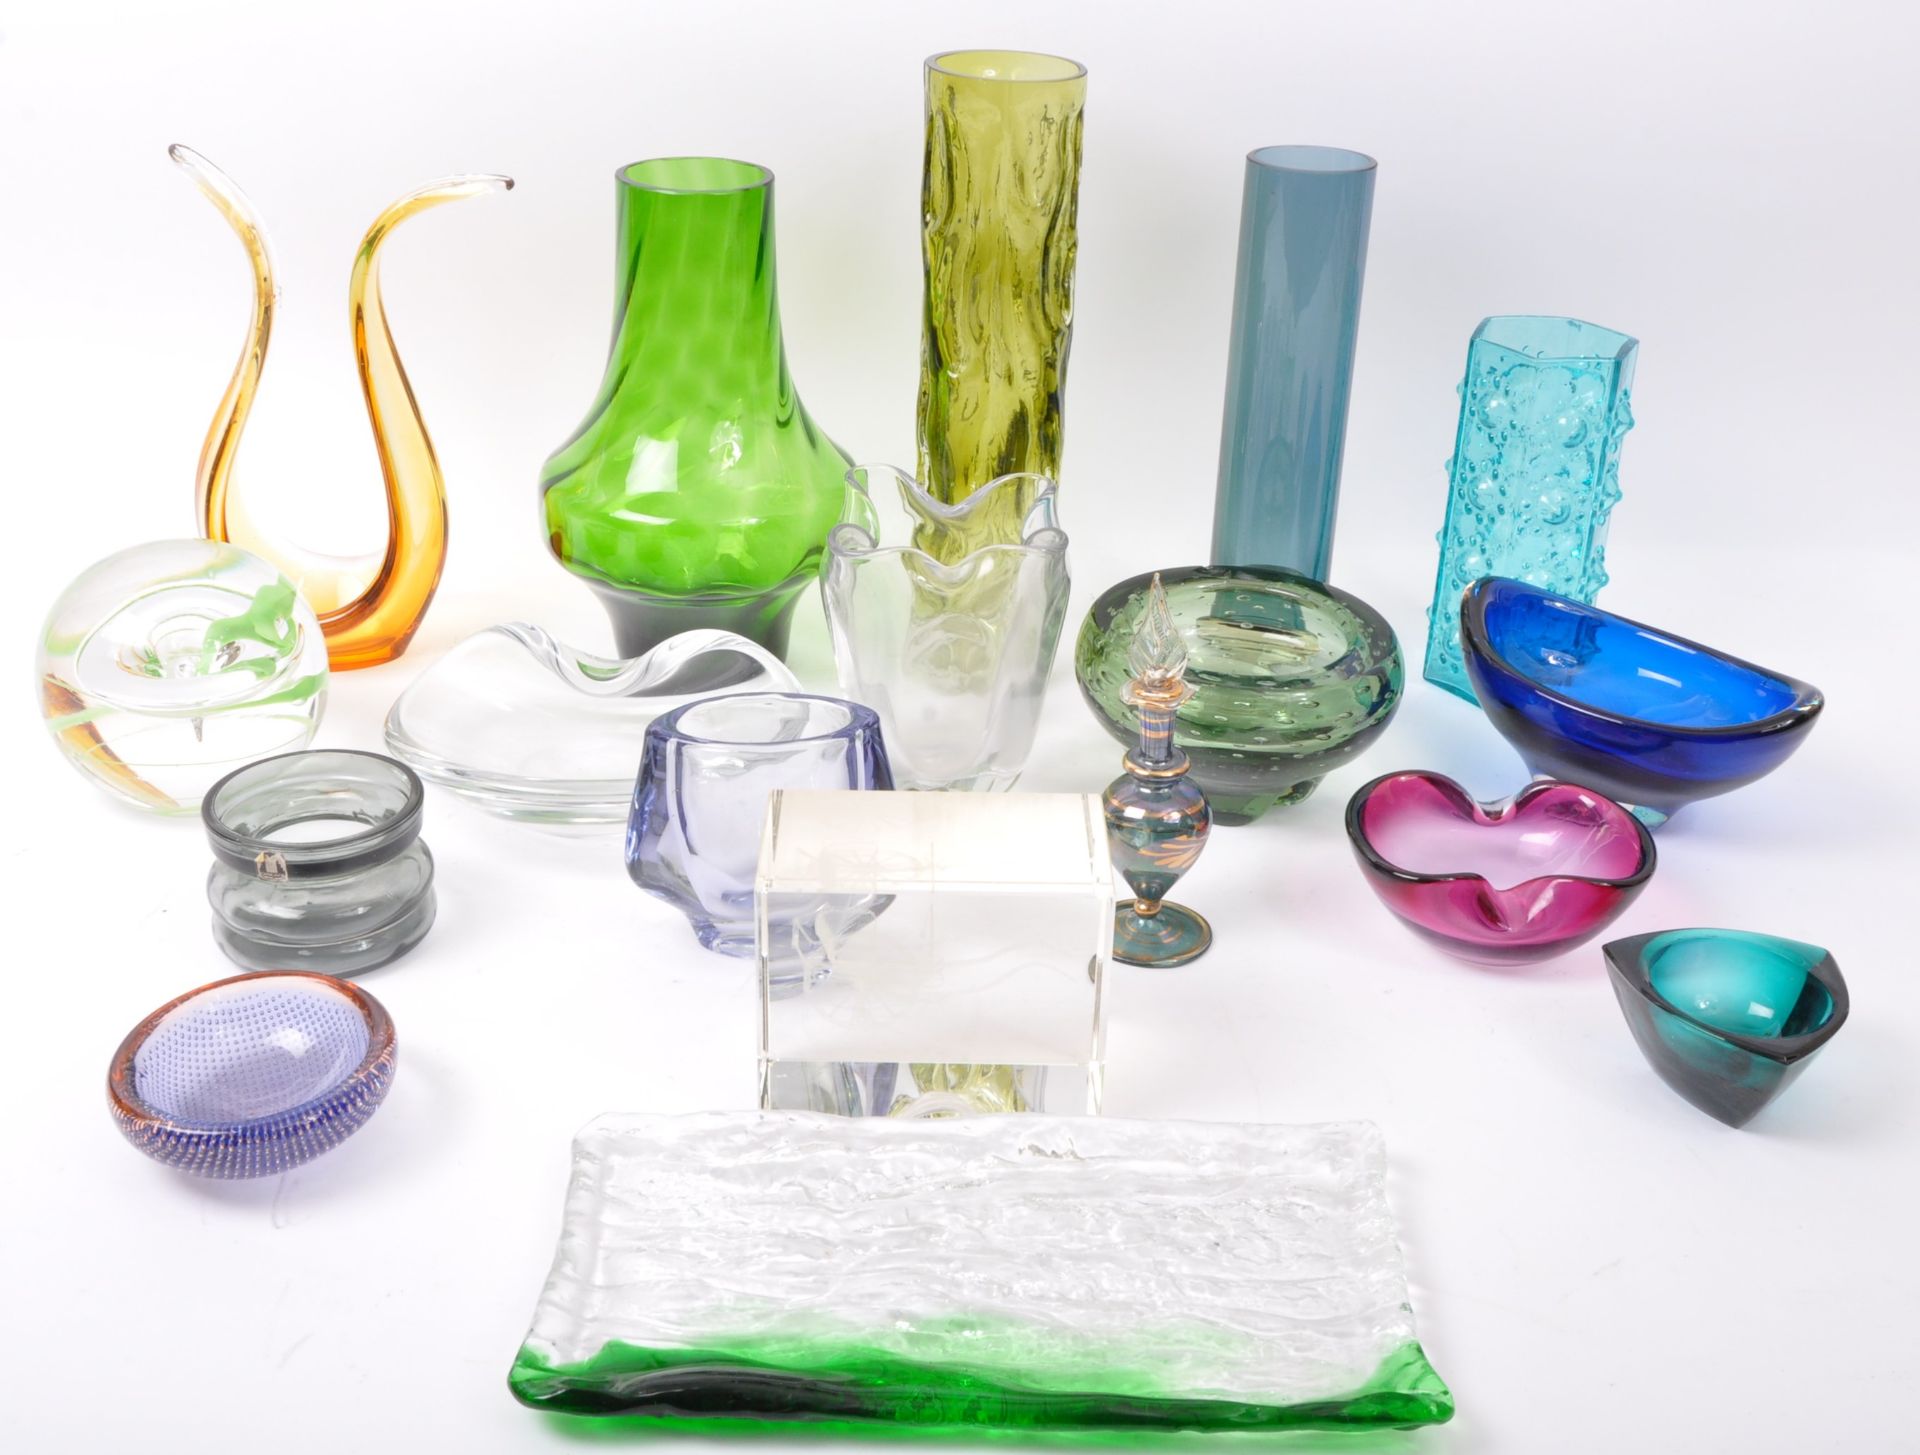 ASSORTMENT OF MID 20TH CENTURY GLASS - VASES - BOWLS